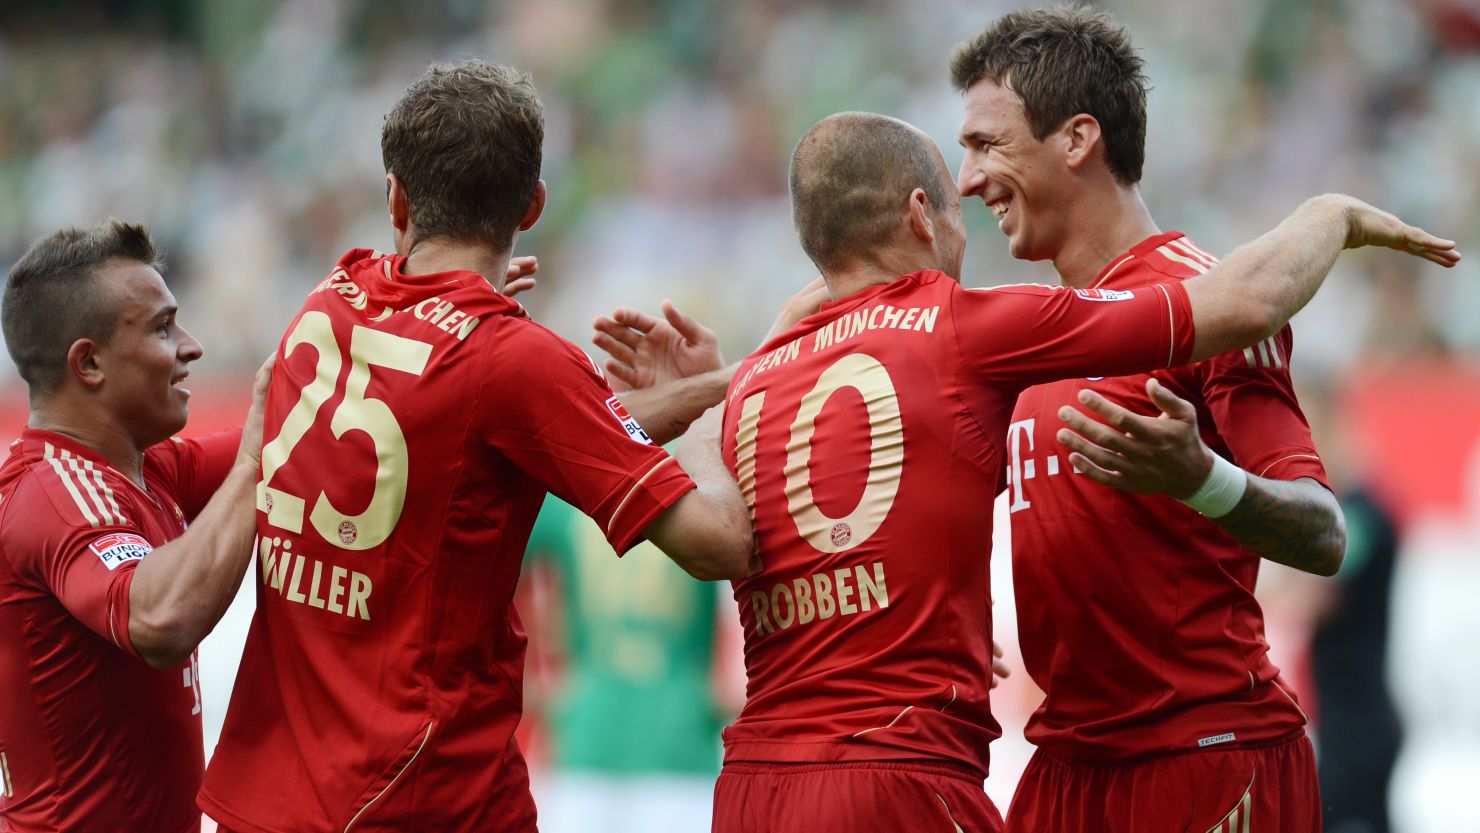 Bayern Munich players celebrate their win over Fruth